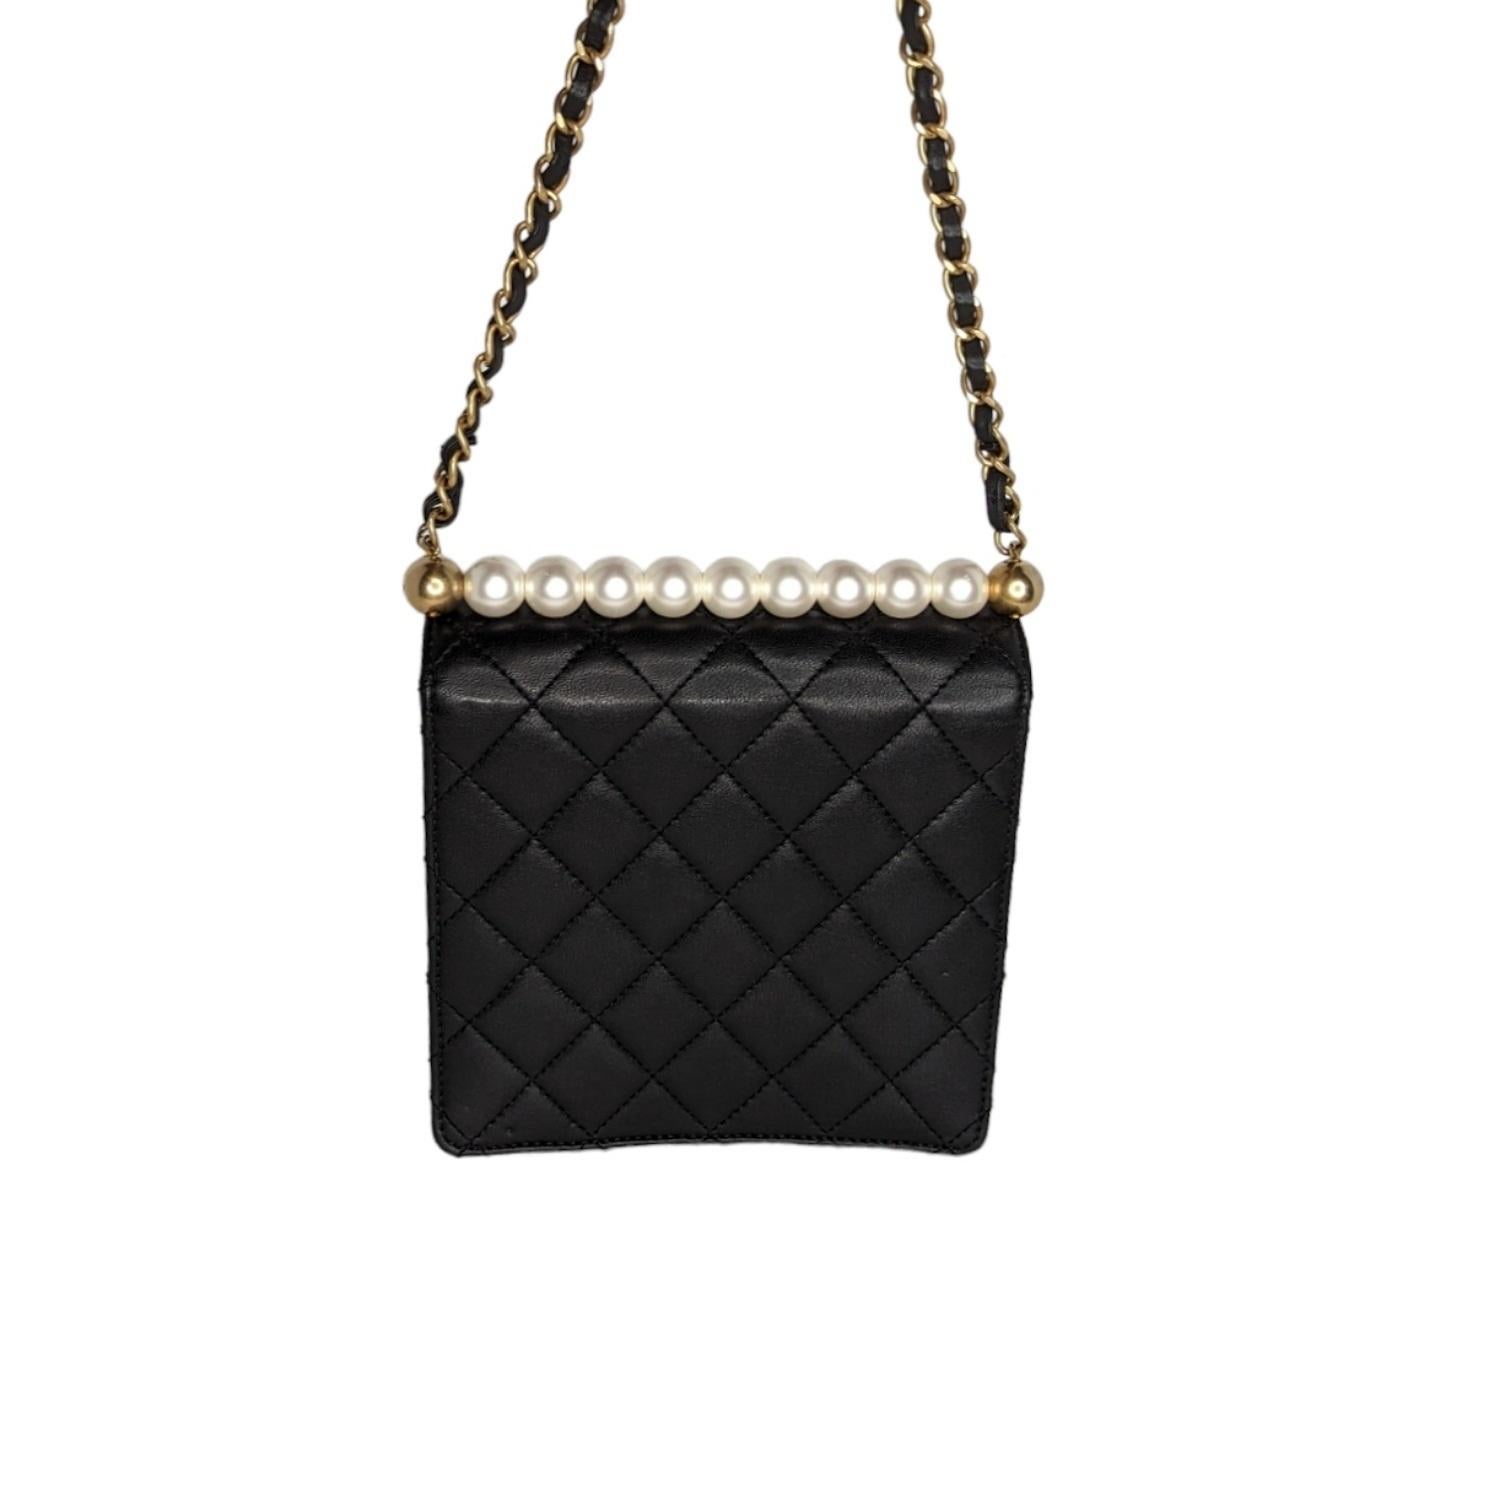 Chanel Goatskin Quilted Chic Pearls Flap in Black. This stylish shoulder bag is crafted of diamond-quilted textured goatskin leather. The bag features leather threaded aged gold chain strap, imitation pearls aligned on the top, and a flap with an